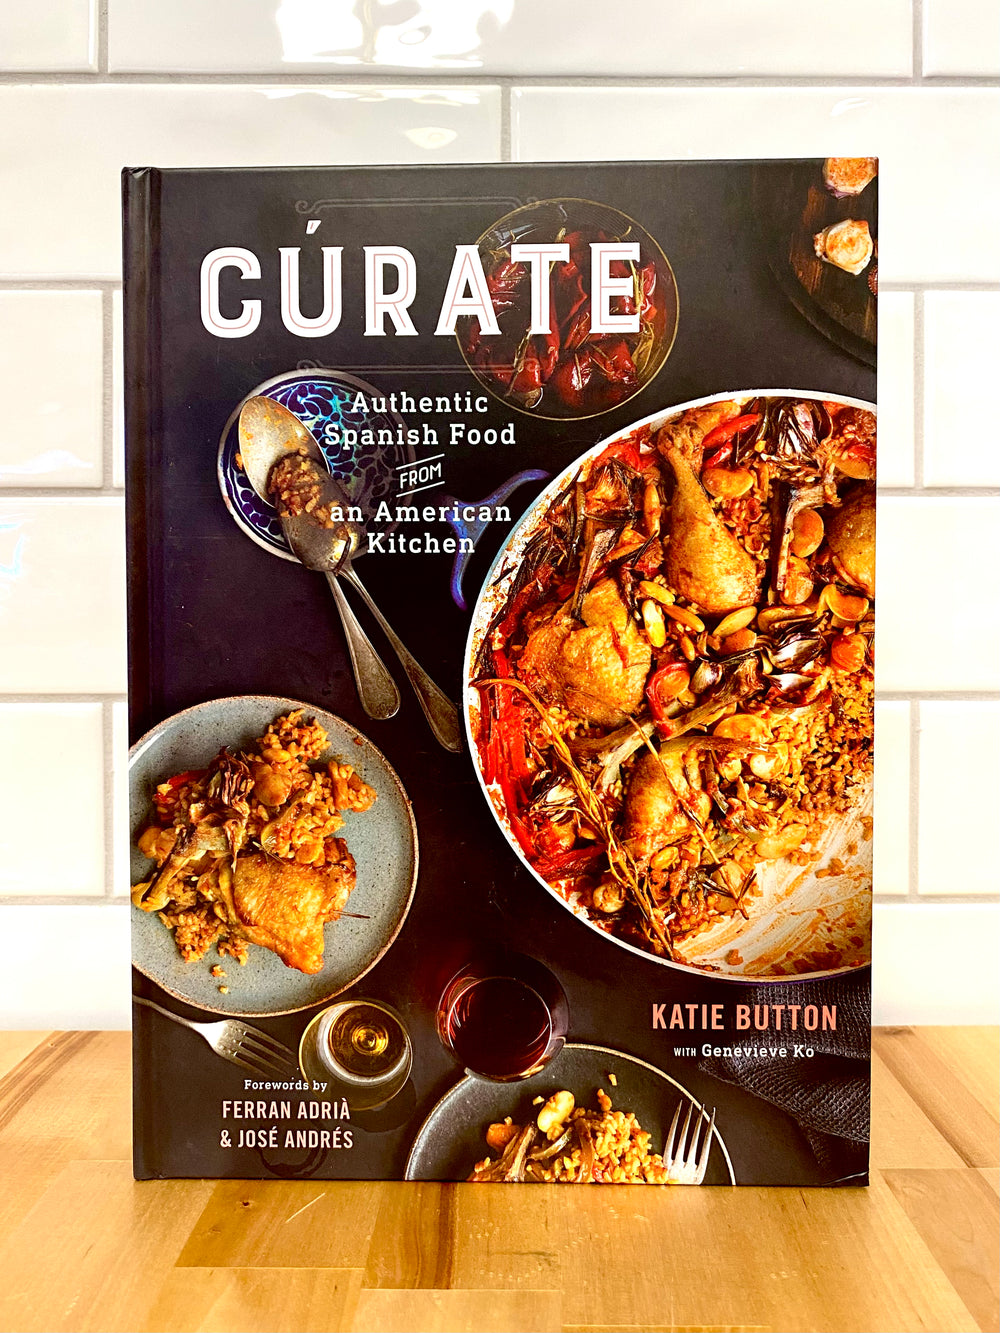 CÚRATE Authentic Spanish Food from an American Kitchen by Katie Button